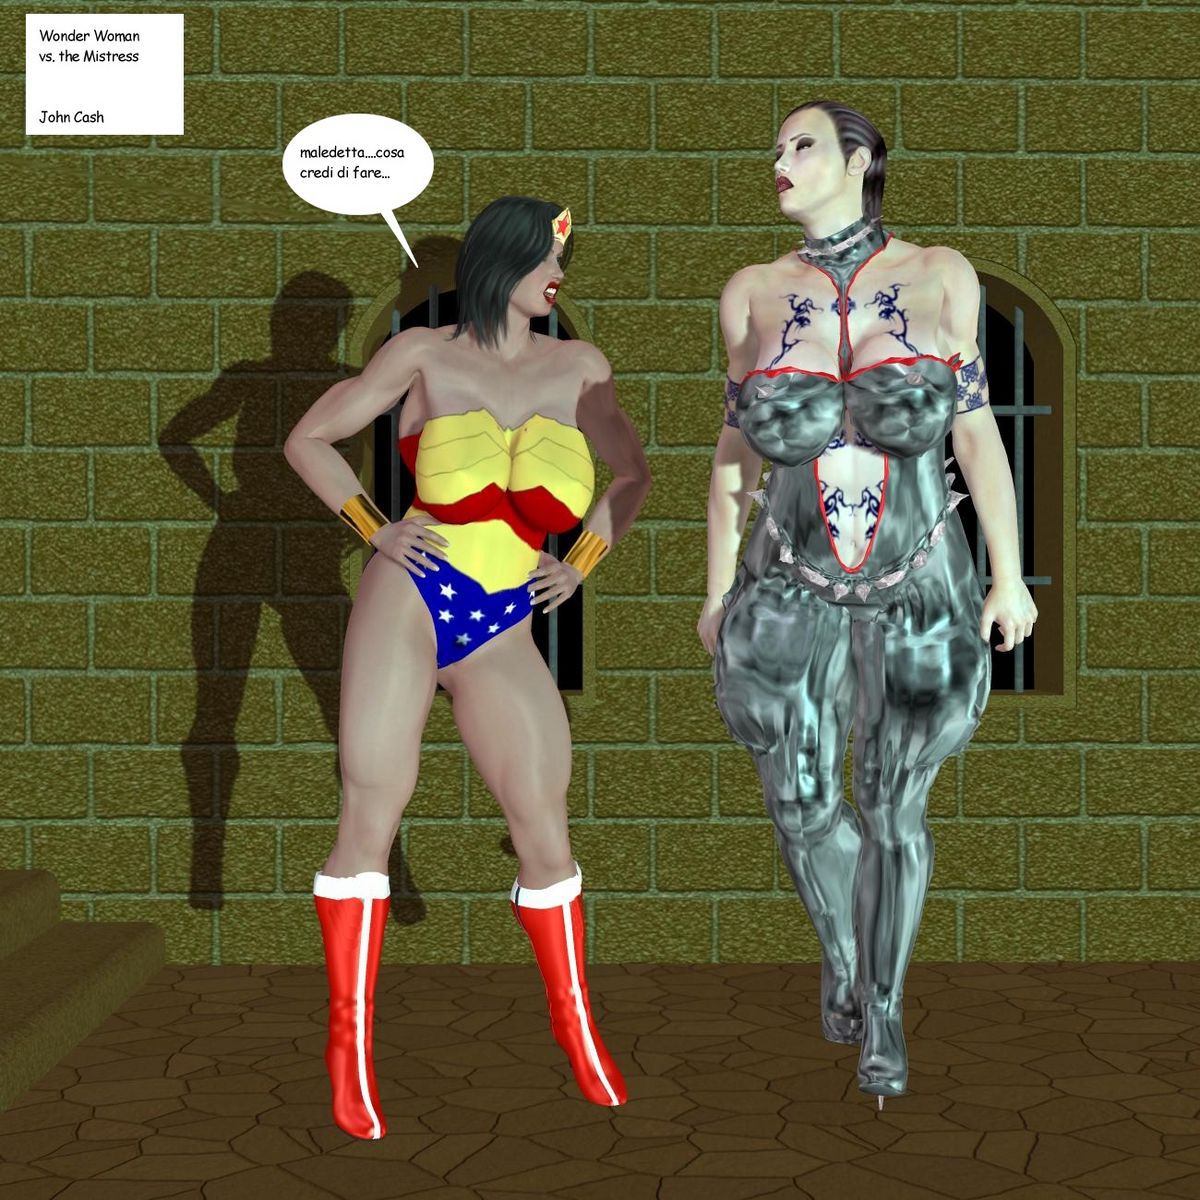 Wonder Woman and other heroines 2